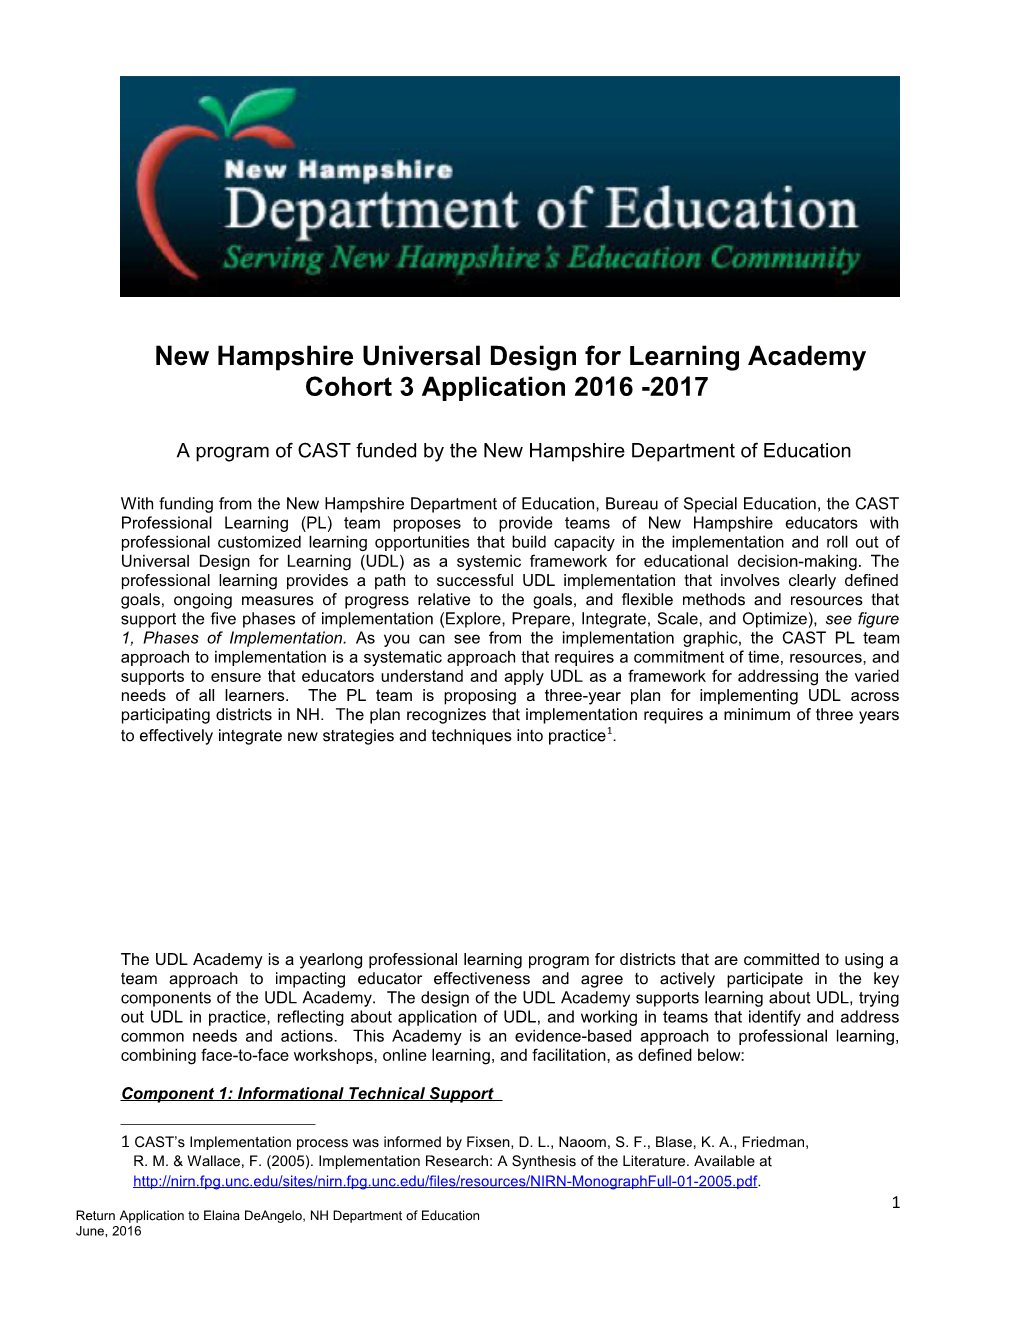 New Hampshire Universal Design for Learning Academy Cohort 3Application 2016 -2017